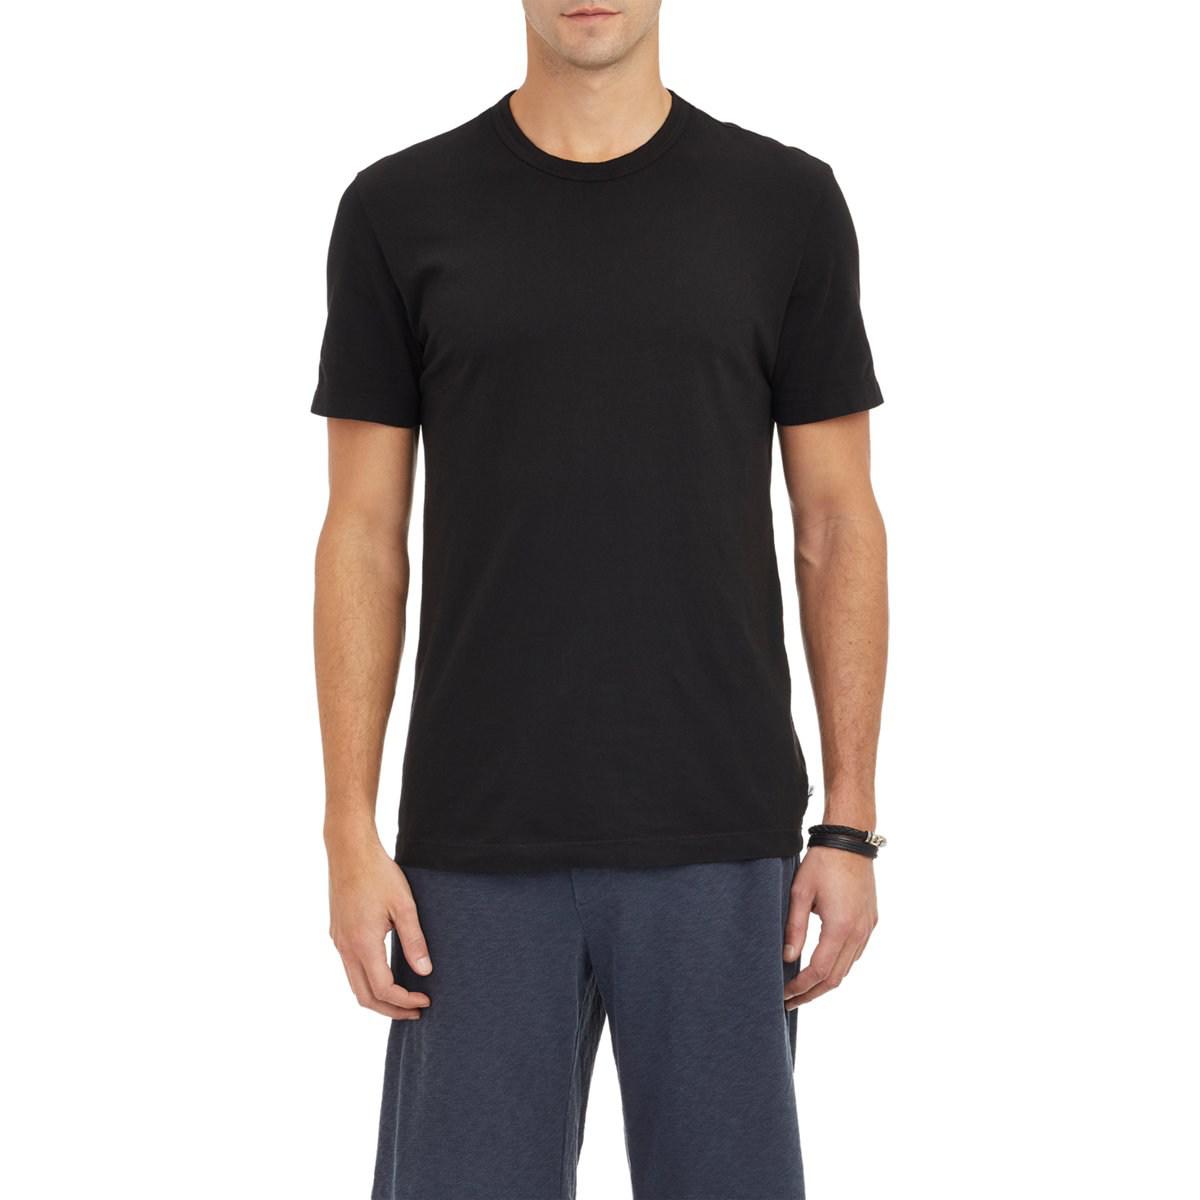 James Perse Cotton Jersey Crewneck T-shirt in Black for Men - Lyst